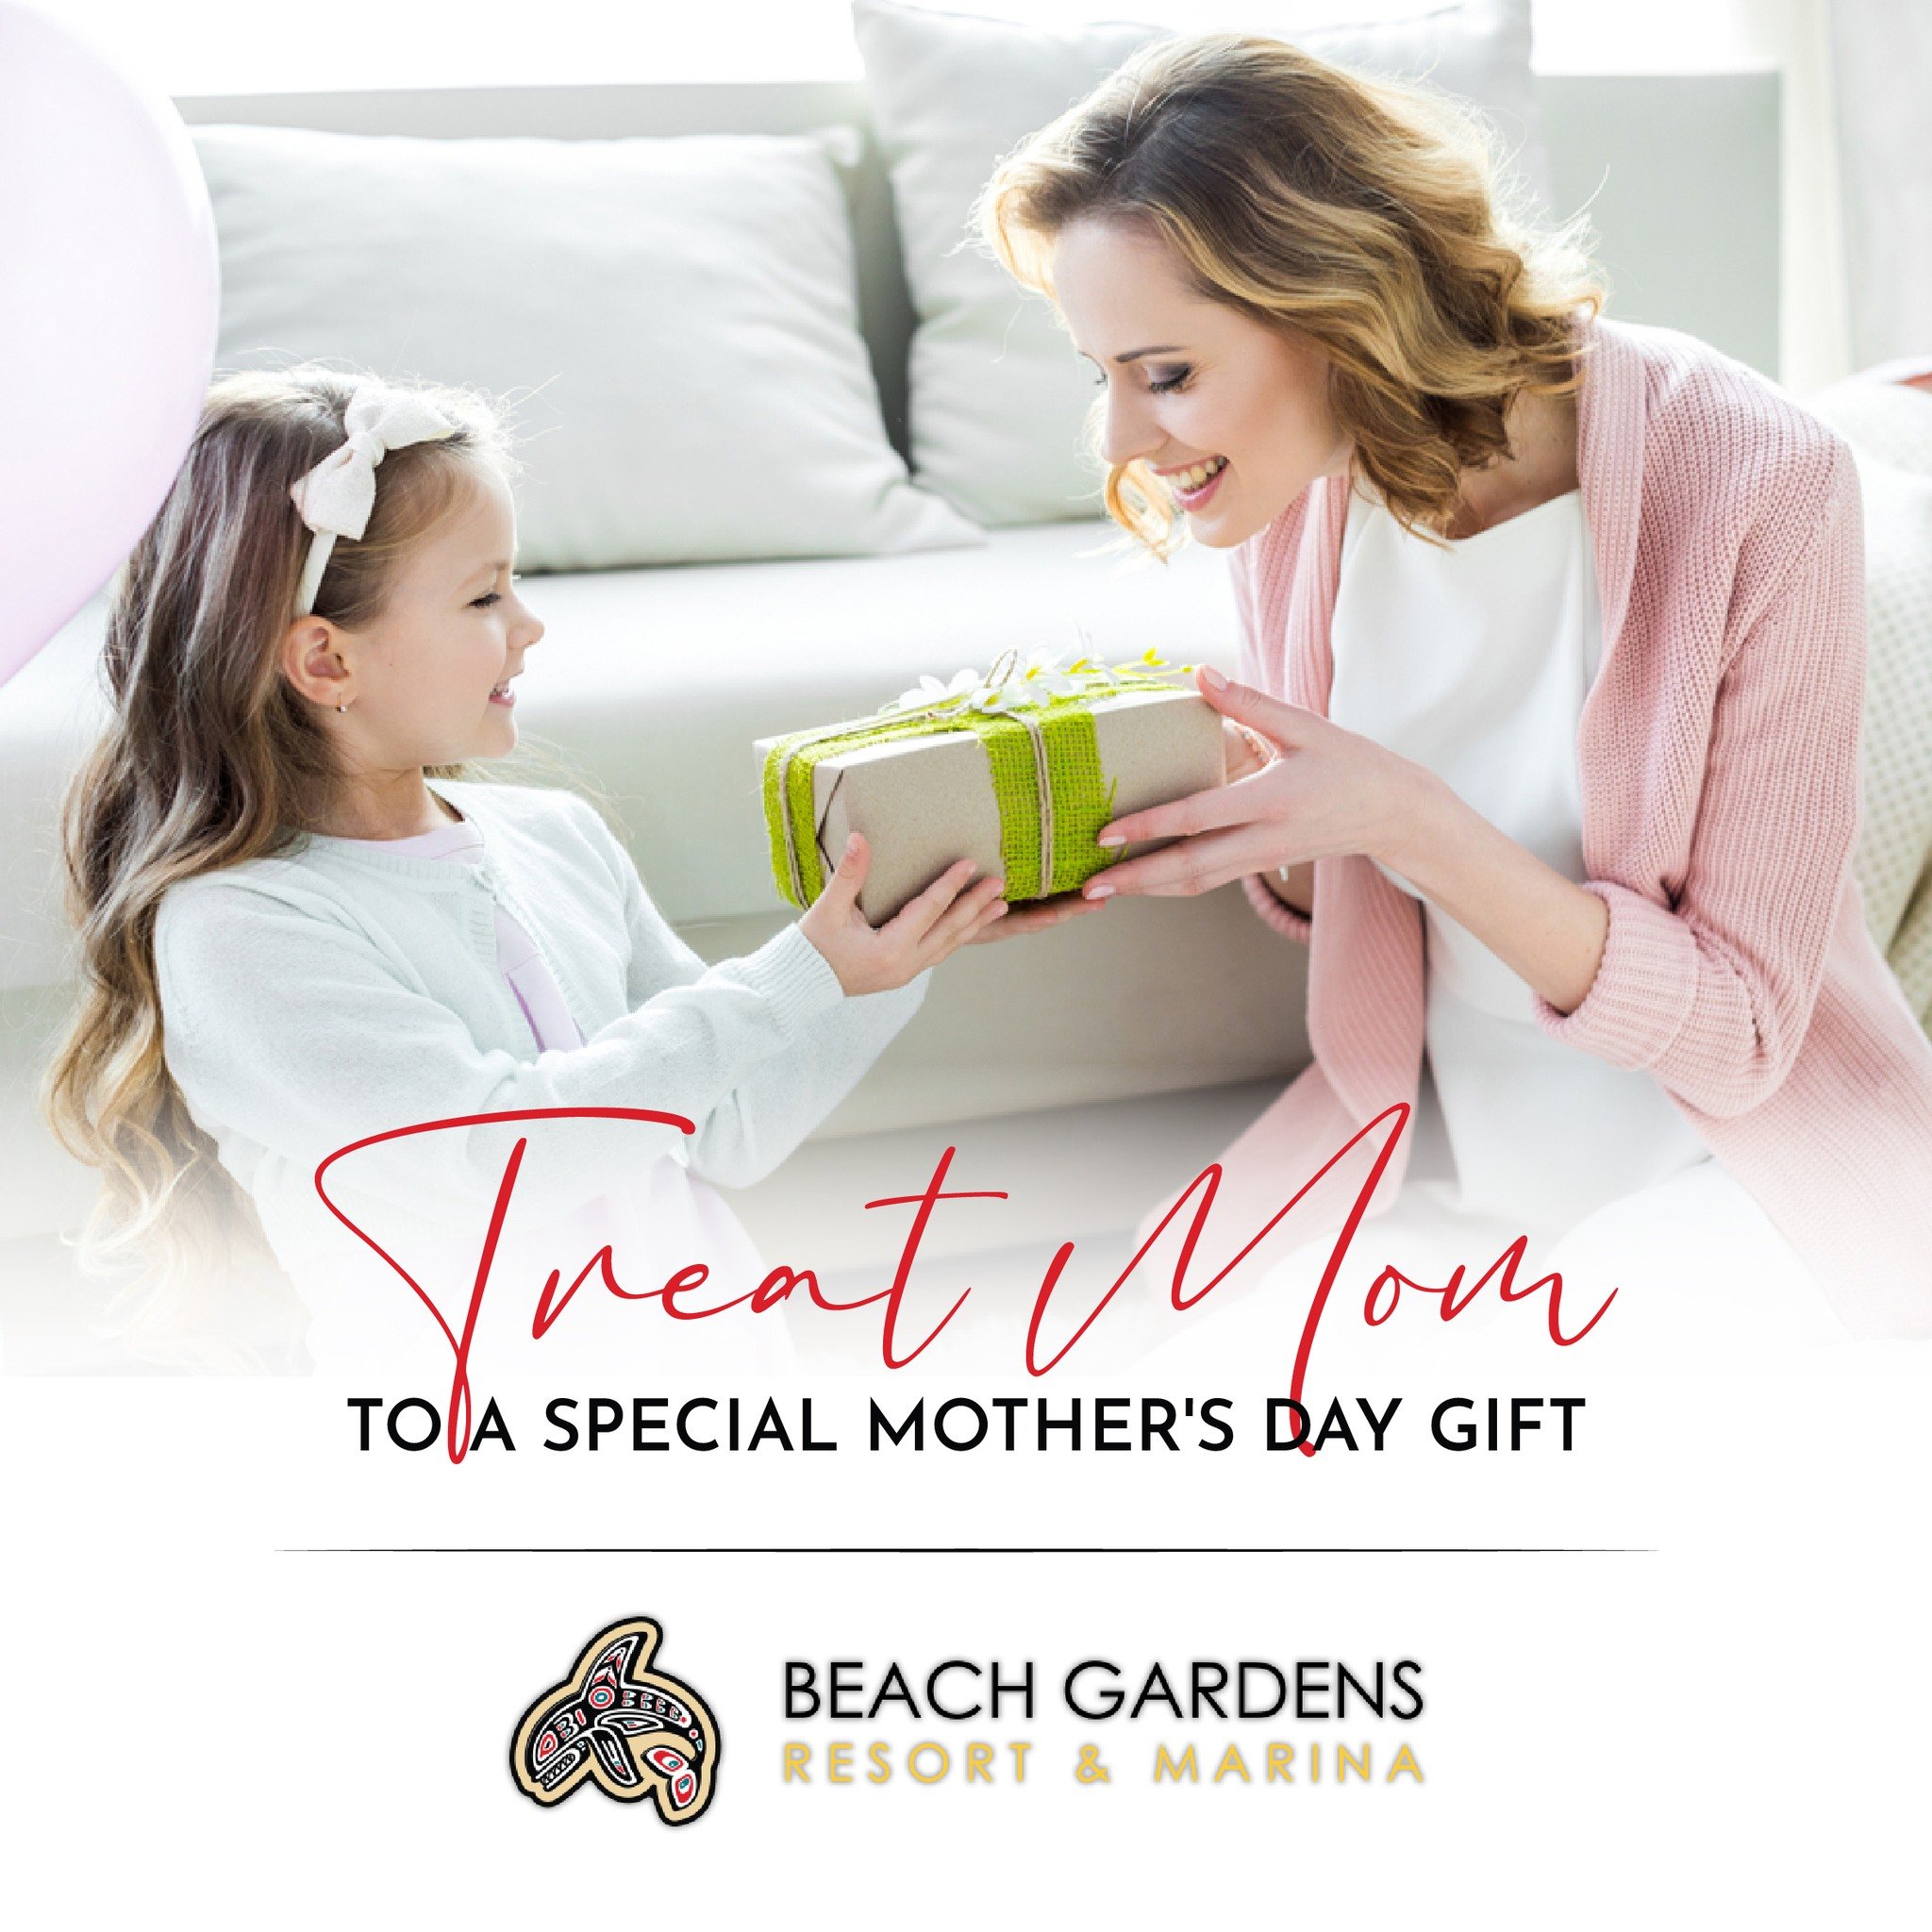 🌷 Treat Mom to a Special Mother's Day Gift! 🌷

Give the gift of a memorable experience this Mother's Day with a gift certificate from The Seasider restaurant and Beach Gardens Resort &amp; Marina in Powell River. 

Whether she enjoys a tasty meal o